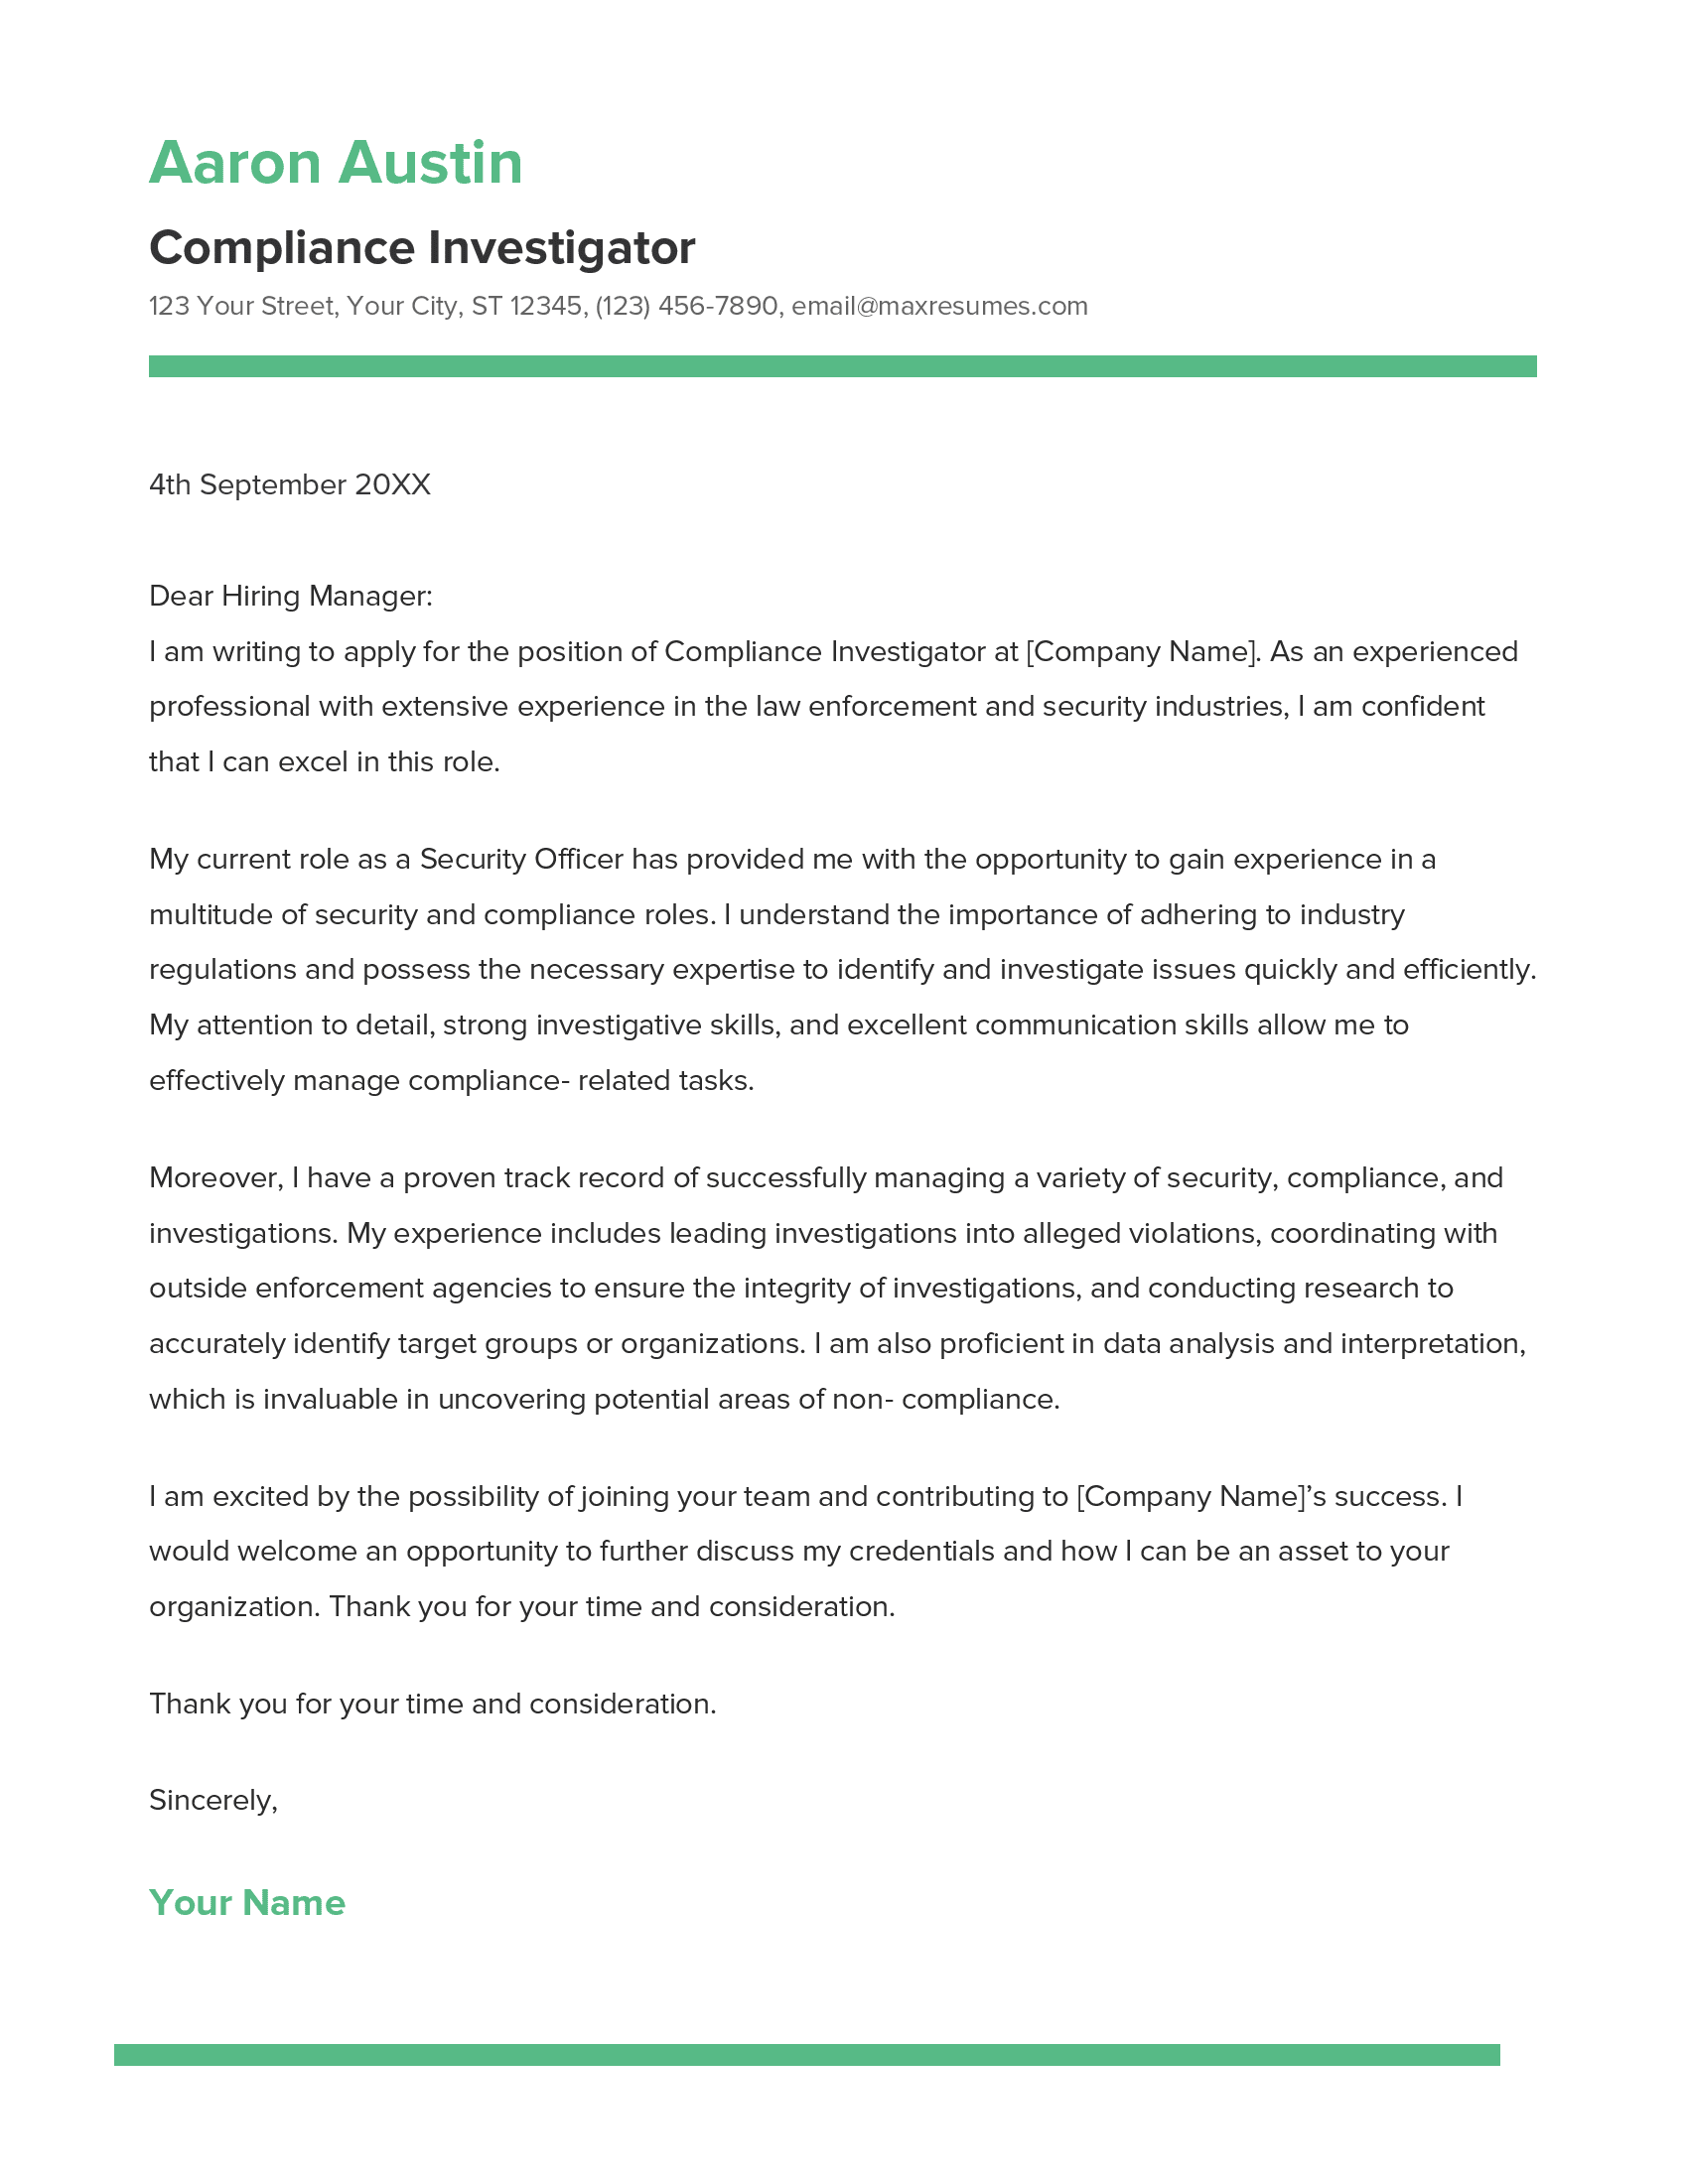 Compliance Investigator Cover Letter Example